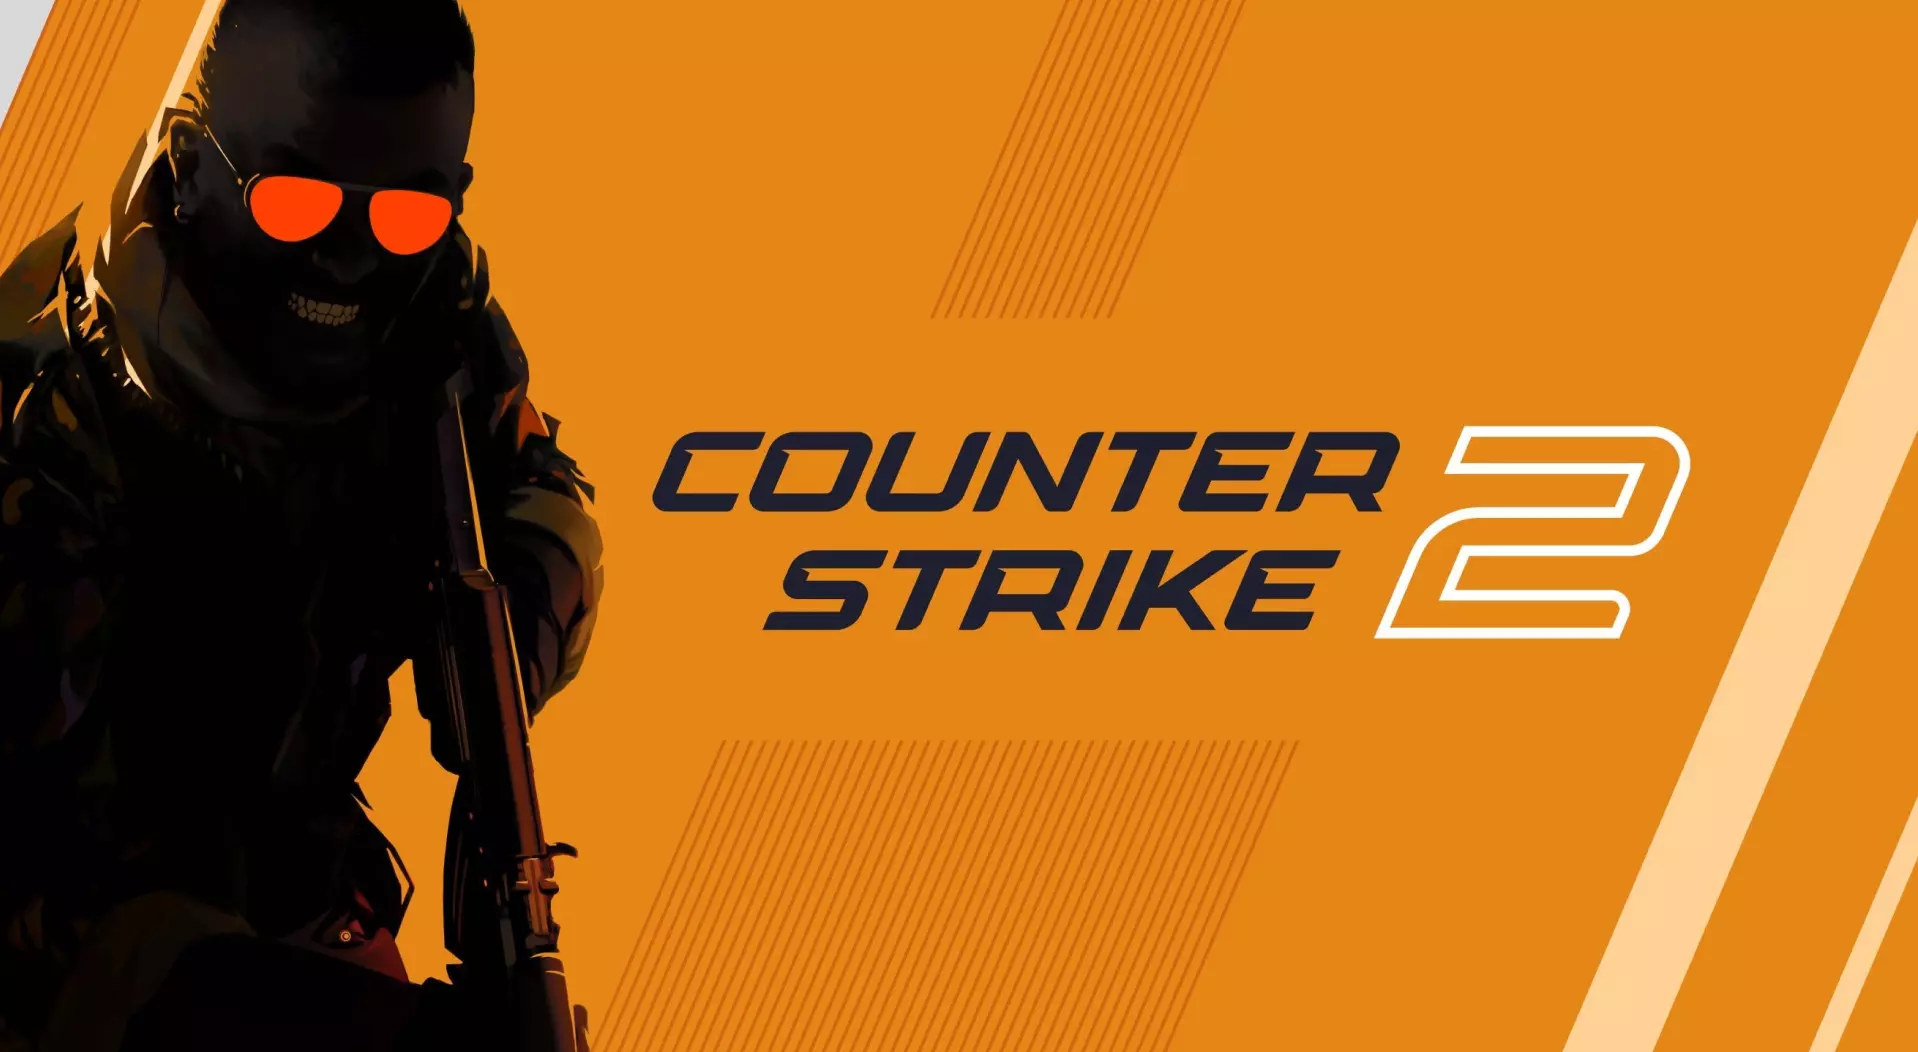 Valve releases major update for Counter-Strike 2, adding left-handed aiming and more